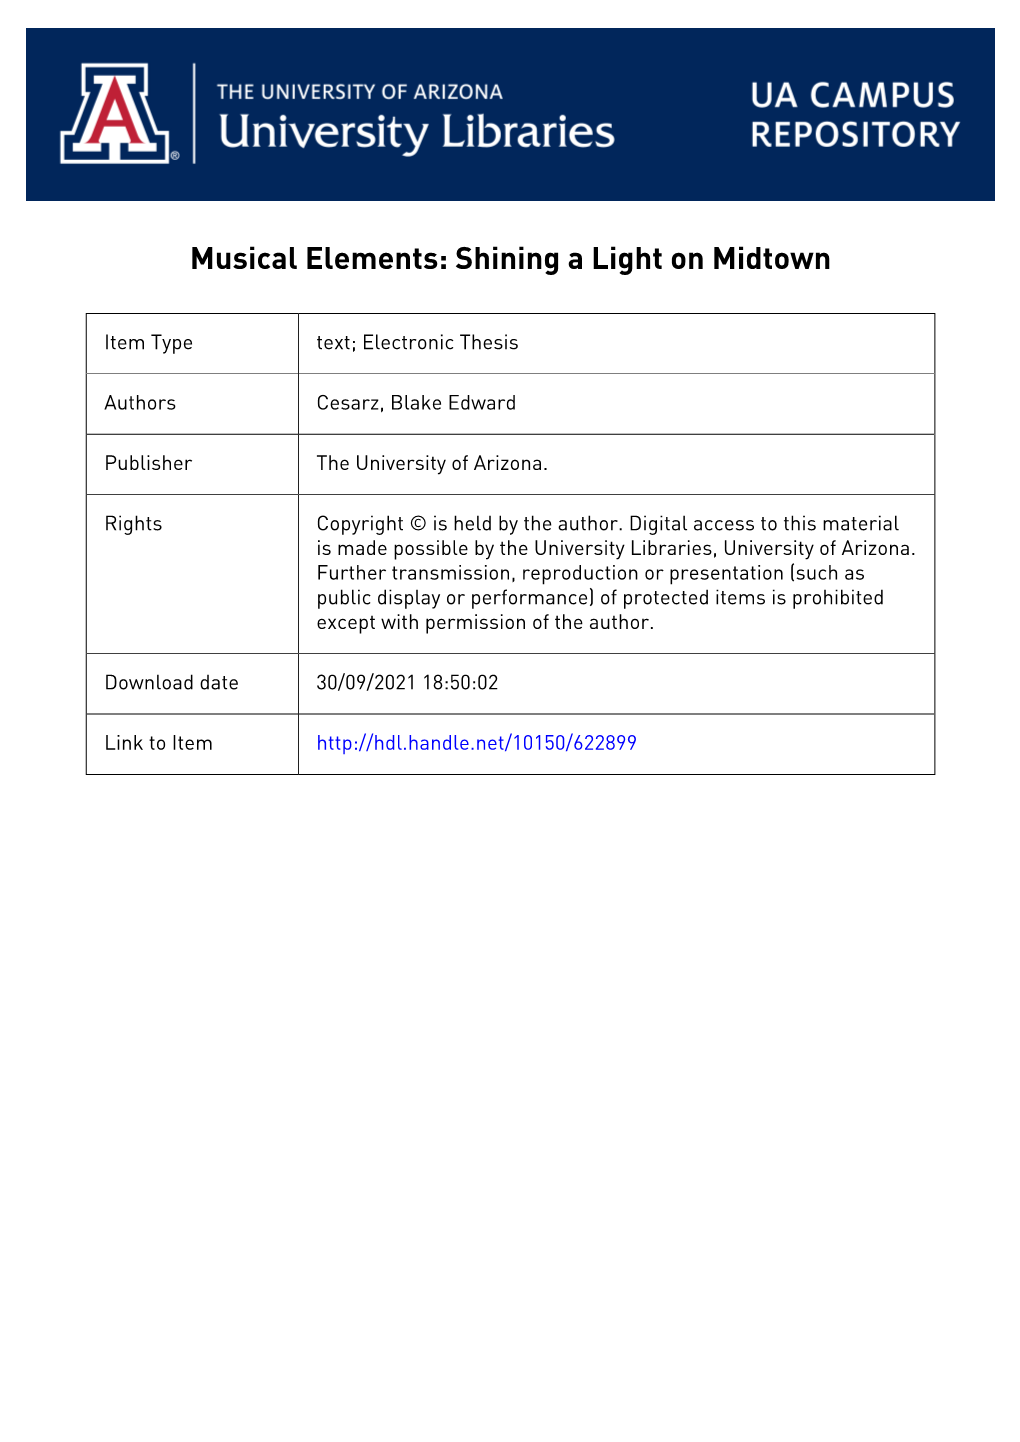 MUSICAL ELEMENTS: SHINING a LIGHT on MIDTOWN by Blake